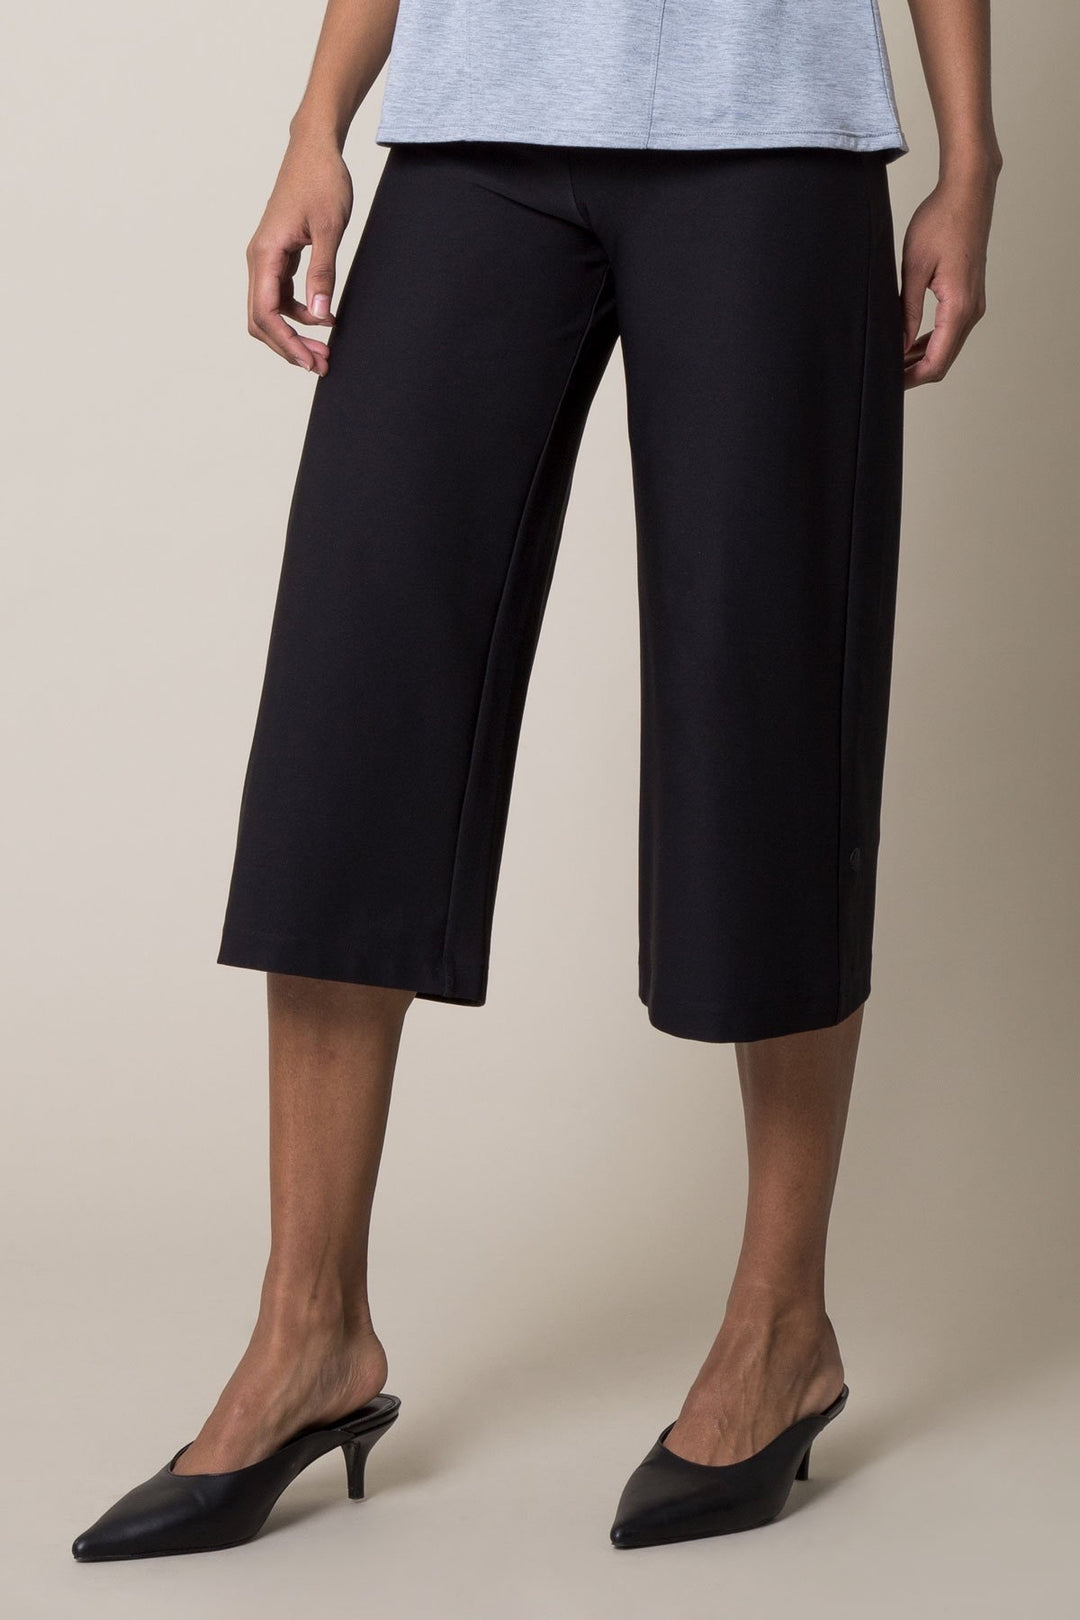 Day to Night Wide Waistband Culottes - Rebel
The Athena allows for the utmost support, smooth transition from adjustable straps, convertible back that provides for comfort and get fit Try out this season's hottest trend and get into these unique culotte-style pants. They are a trendy high waisted design with a wide yoga waistband for lasting comfort.Transitional dressing should be easy and this versatile, no fuss style masters the am-to-pm routine. Made with our signature 4-way stretch performance jersey th